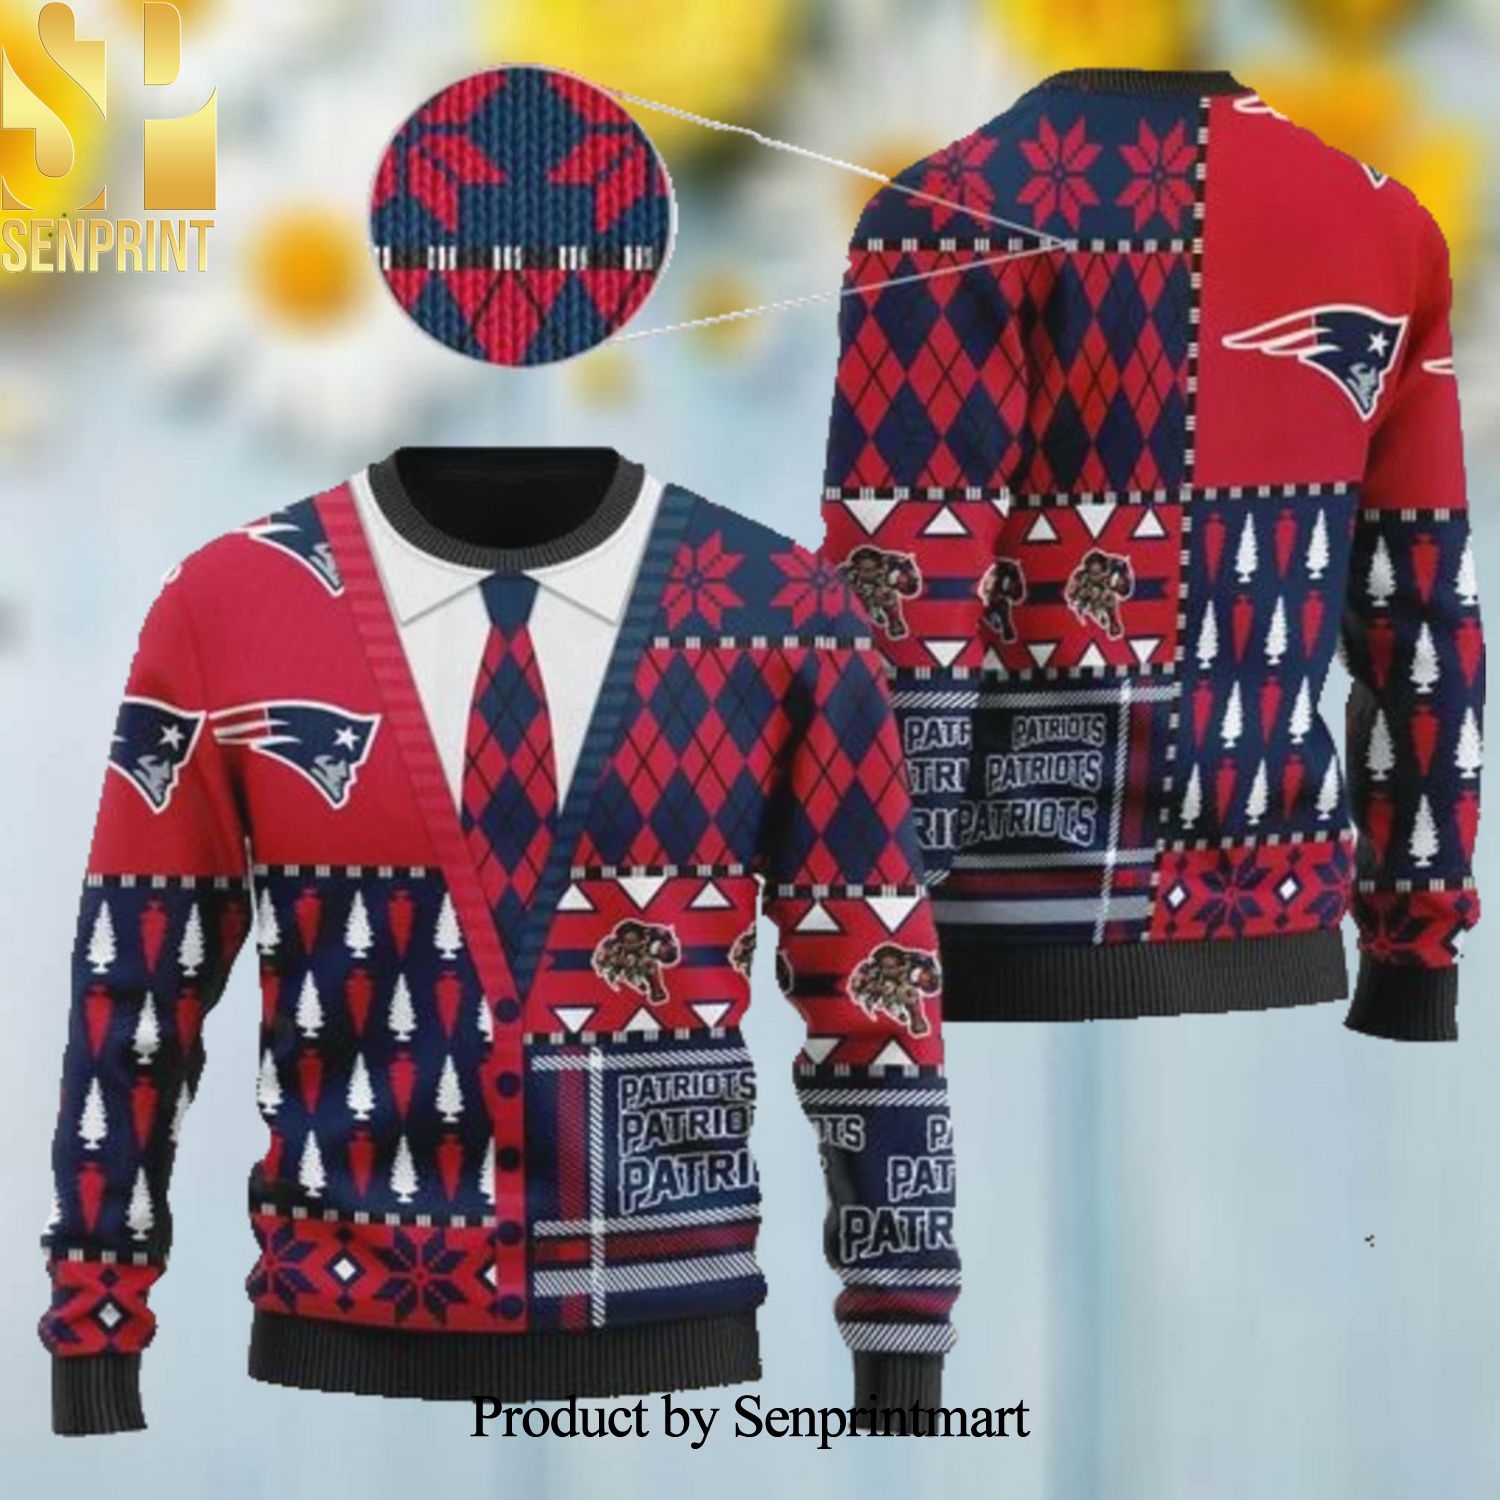 New England Patriots NFL American Football Team Cardigan Style Ugly Christmas Sweater